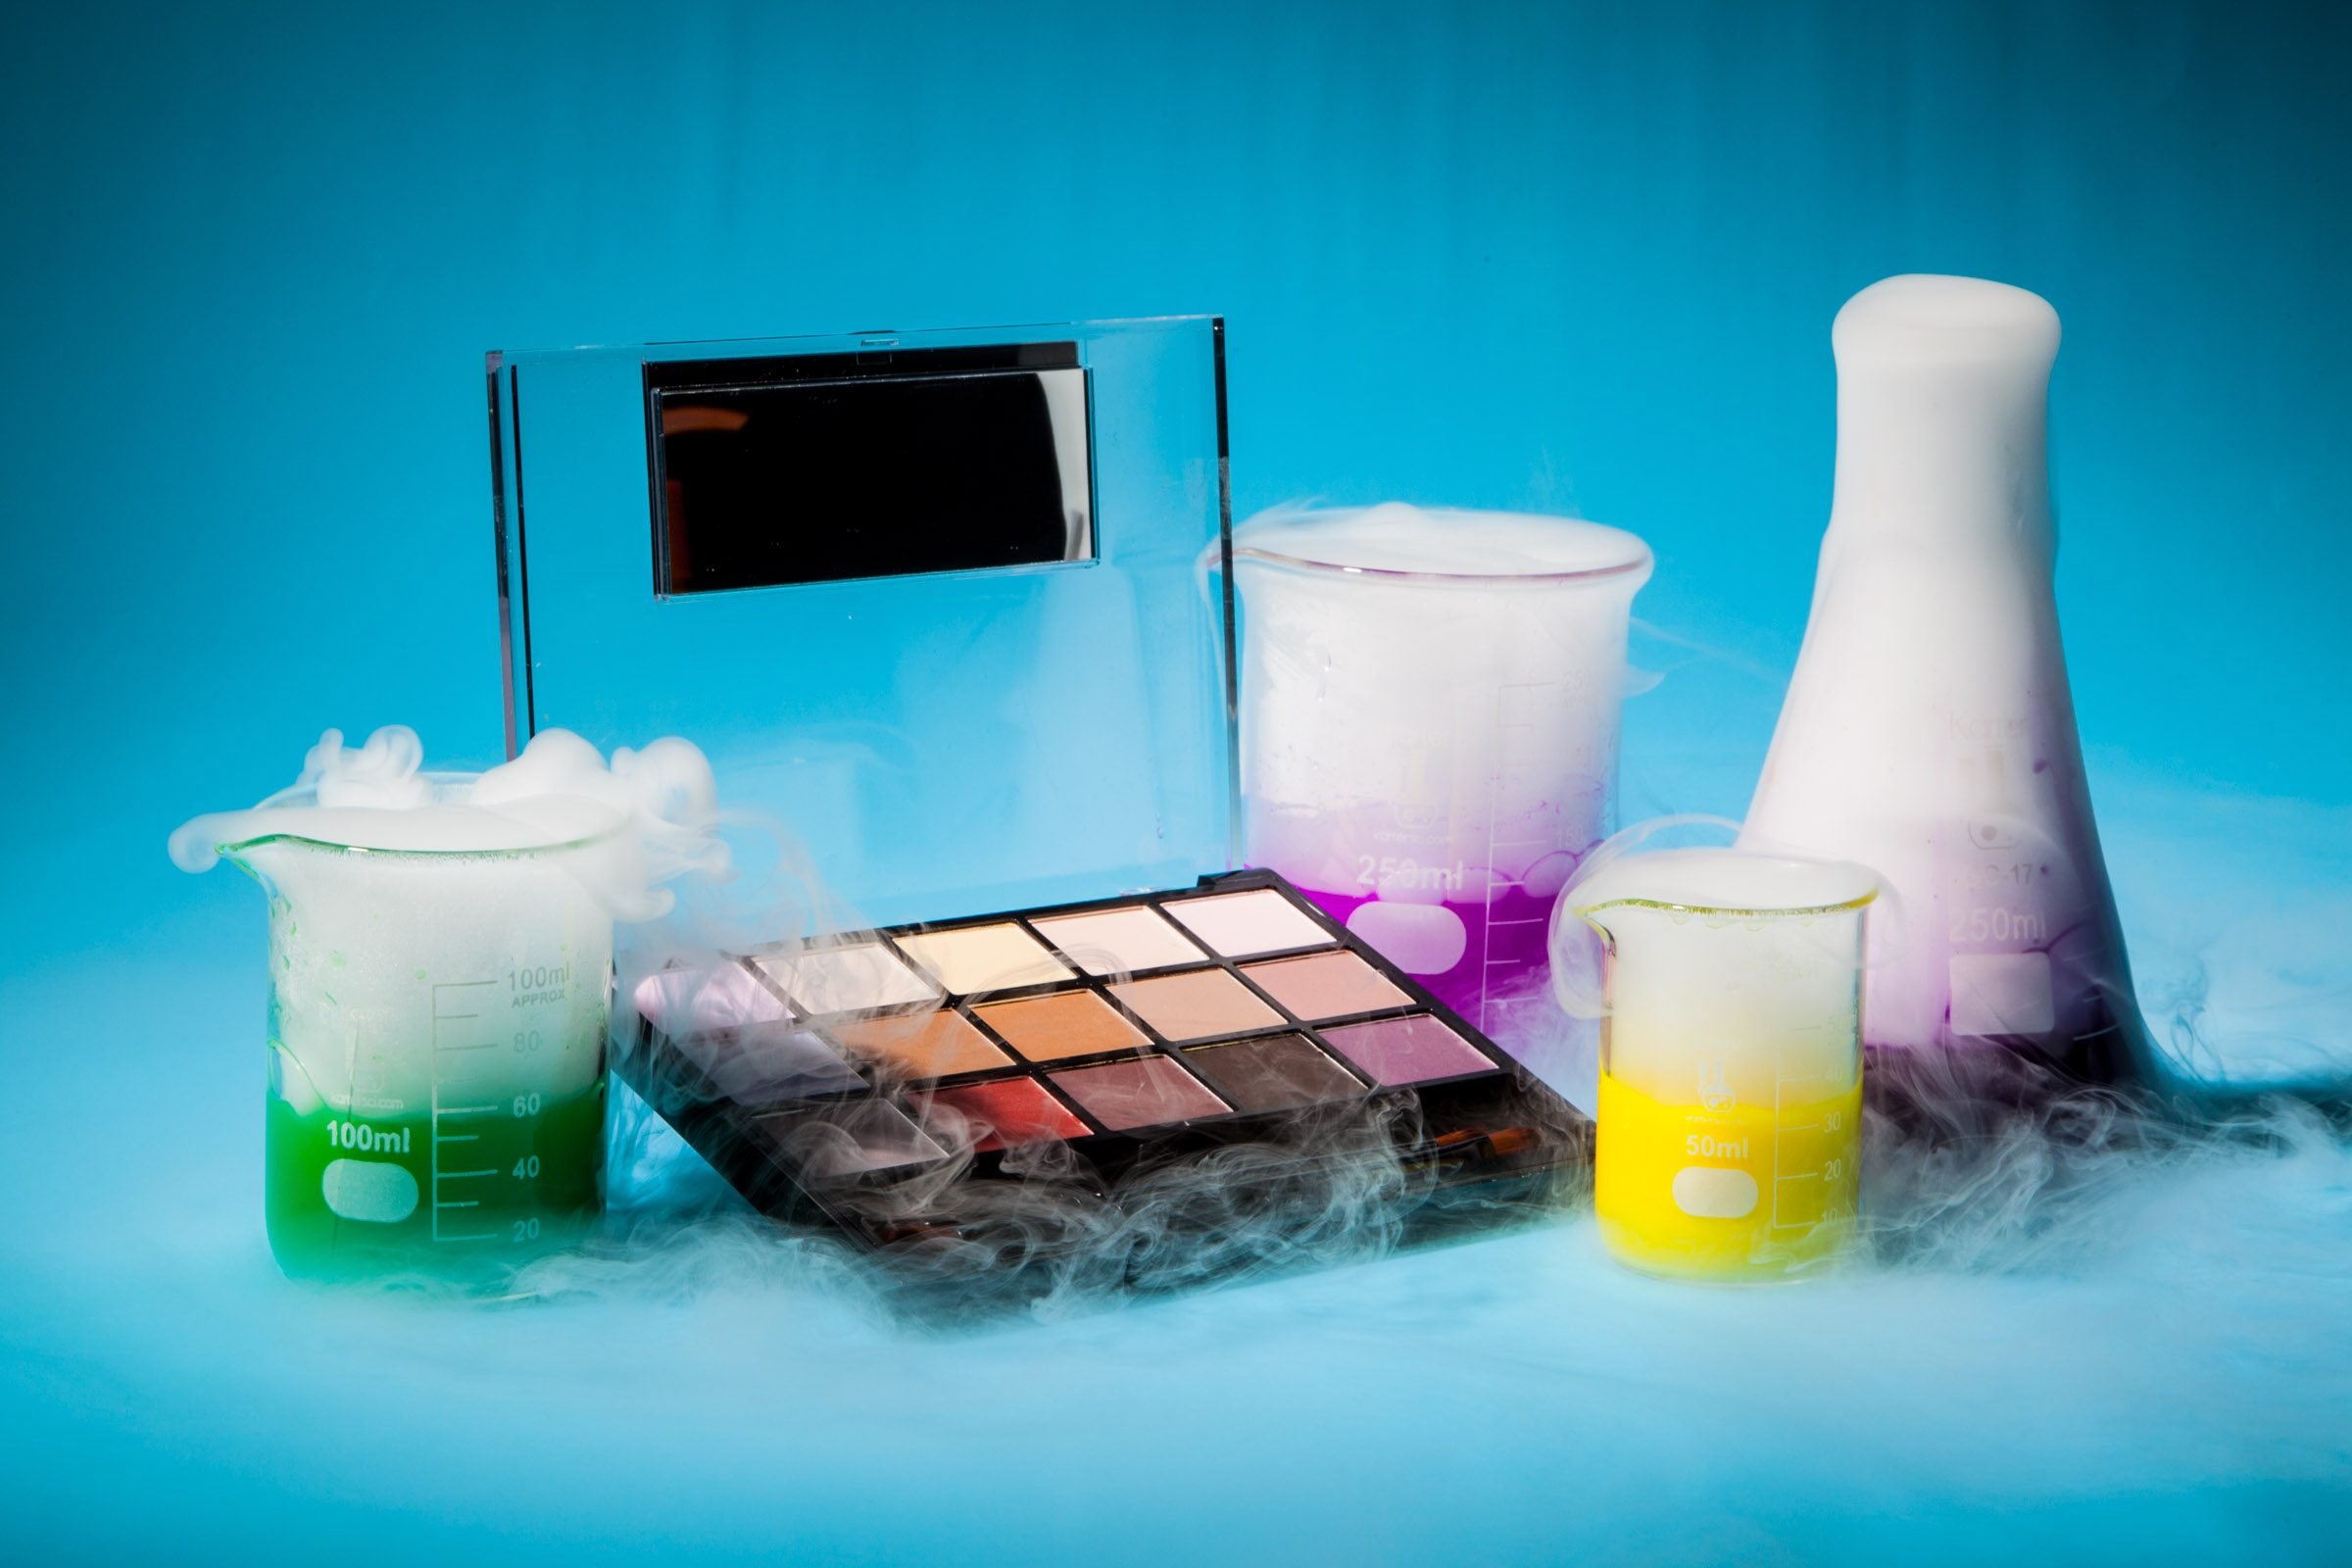 12 Potentially Toxic Ingredients That Can Be Found in Beauty Products